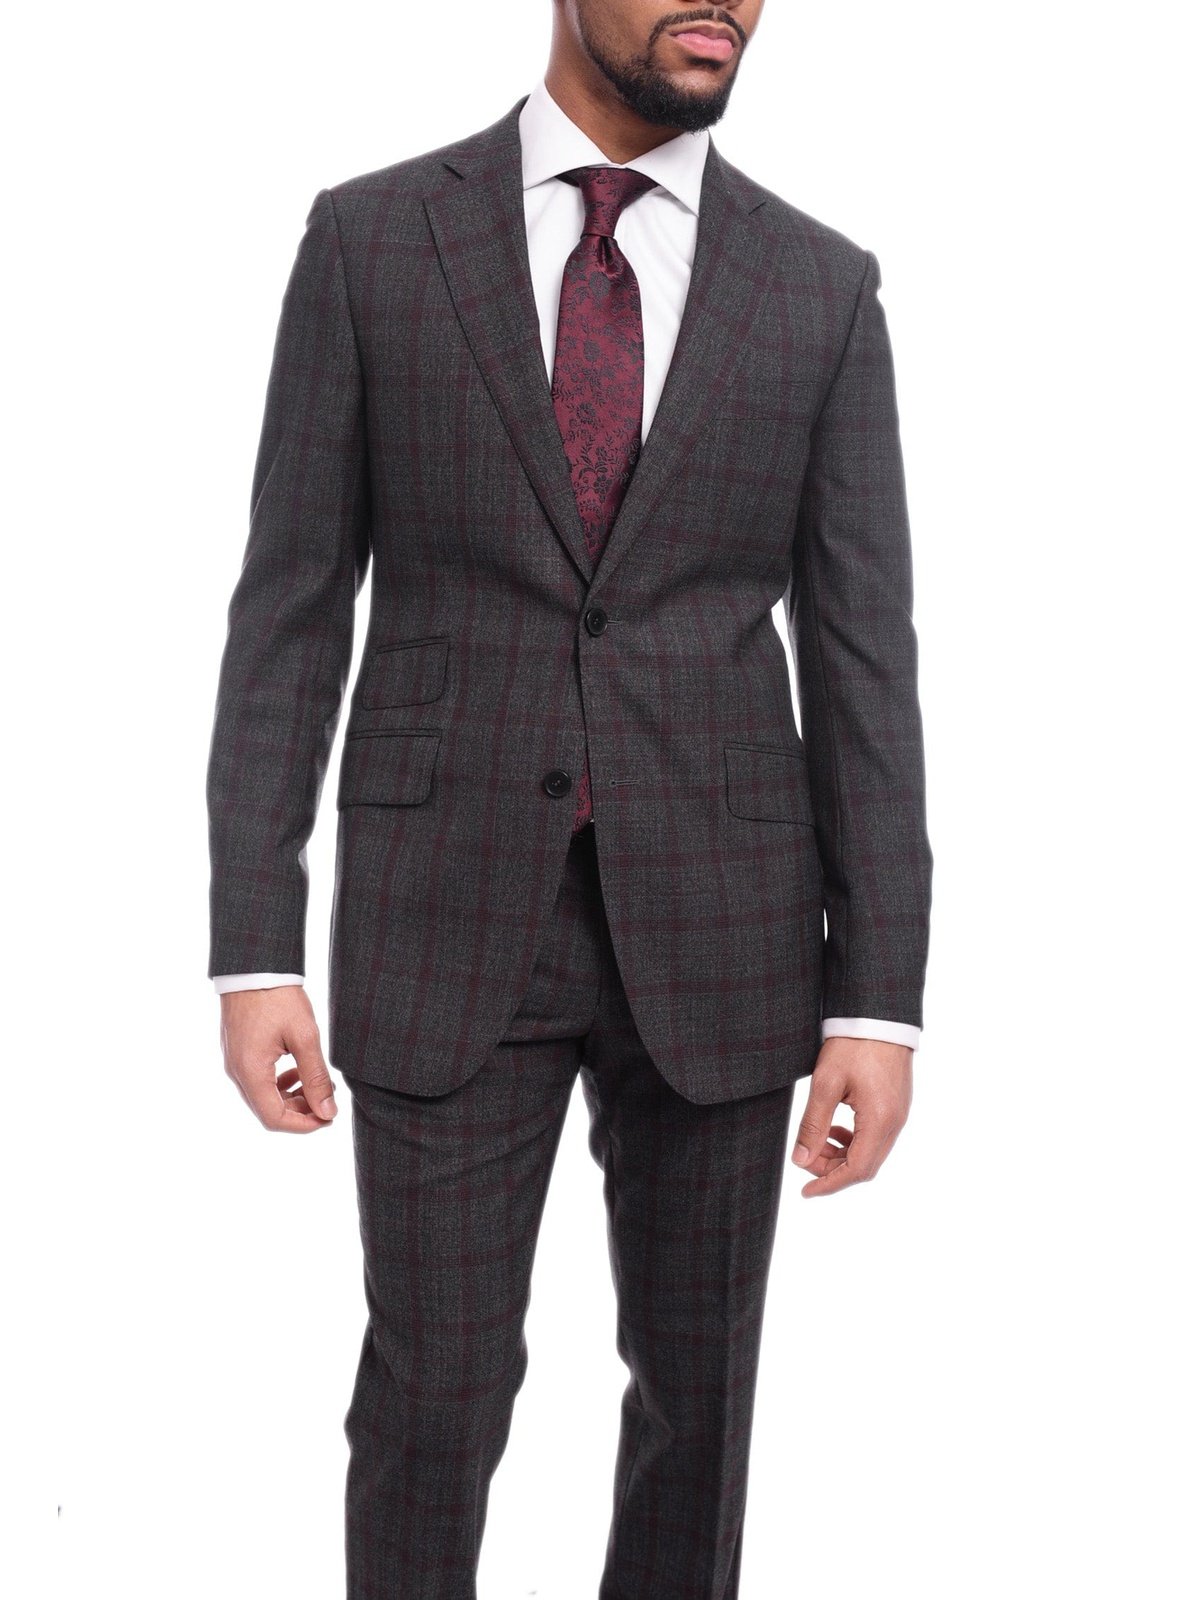 Napoli Sale Suits Napoli Slim Fit Gray &amp; Red Plaid Windowpane Half Canvased Super 150s Wool Suit